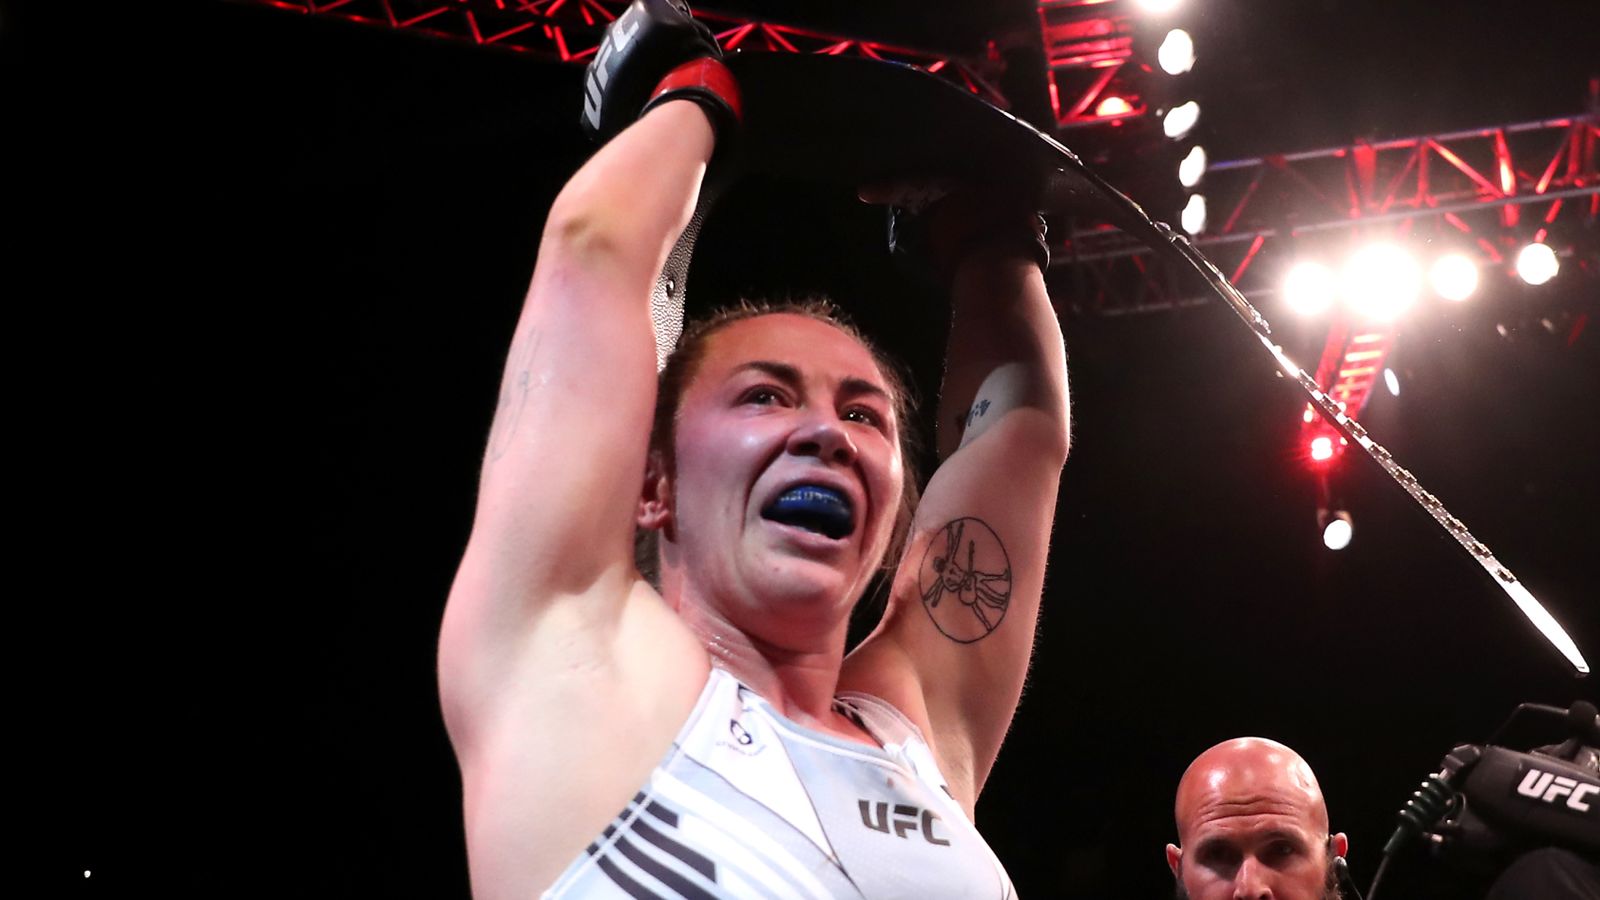 molly-mccann-might-never-top-electric-spinning-elbow-finish-but-her-fights-will-get-even-better